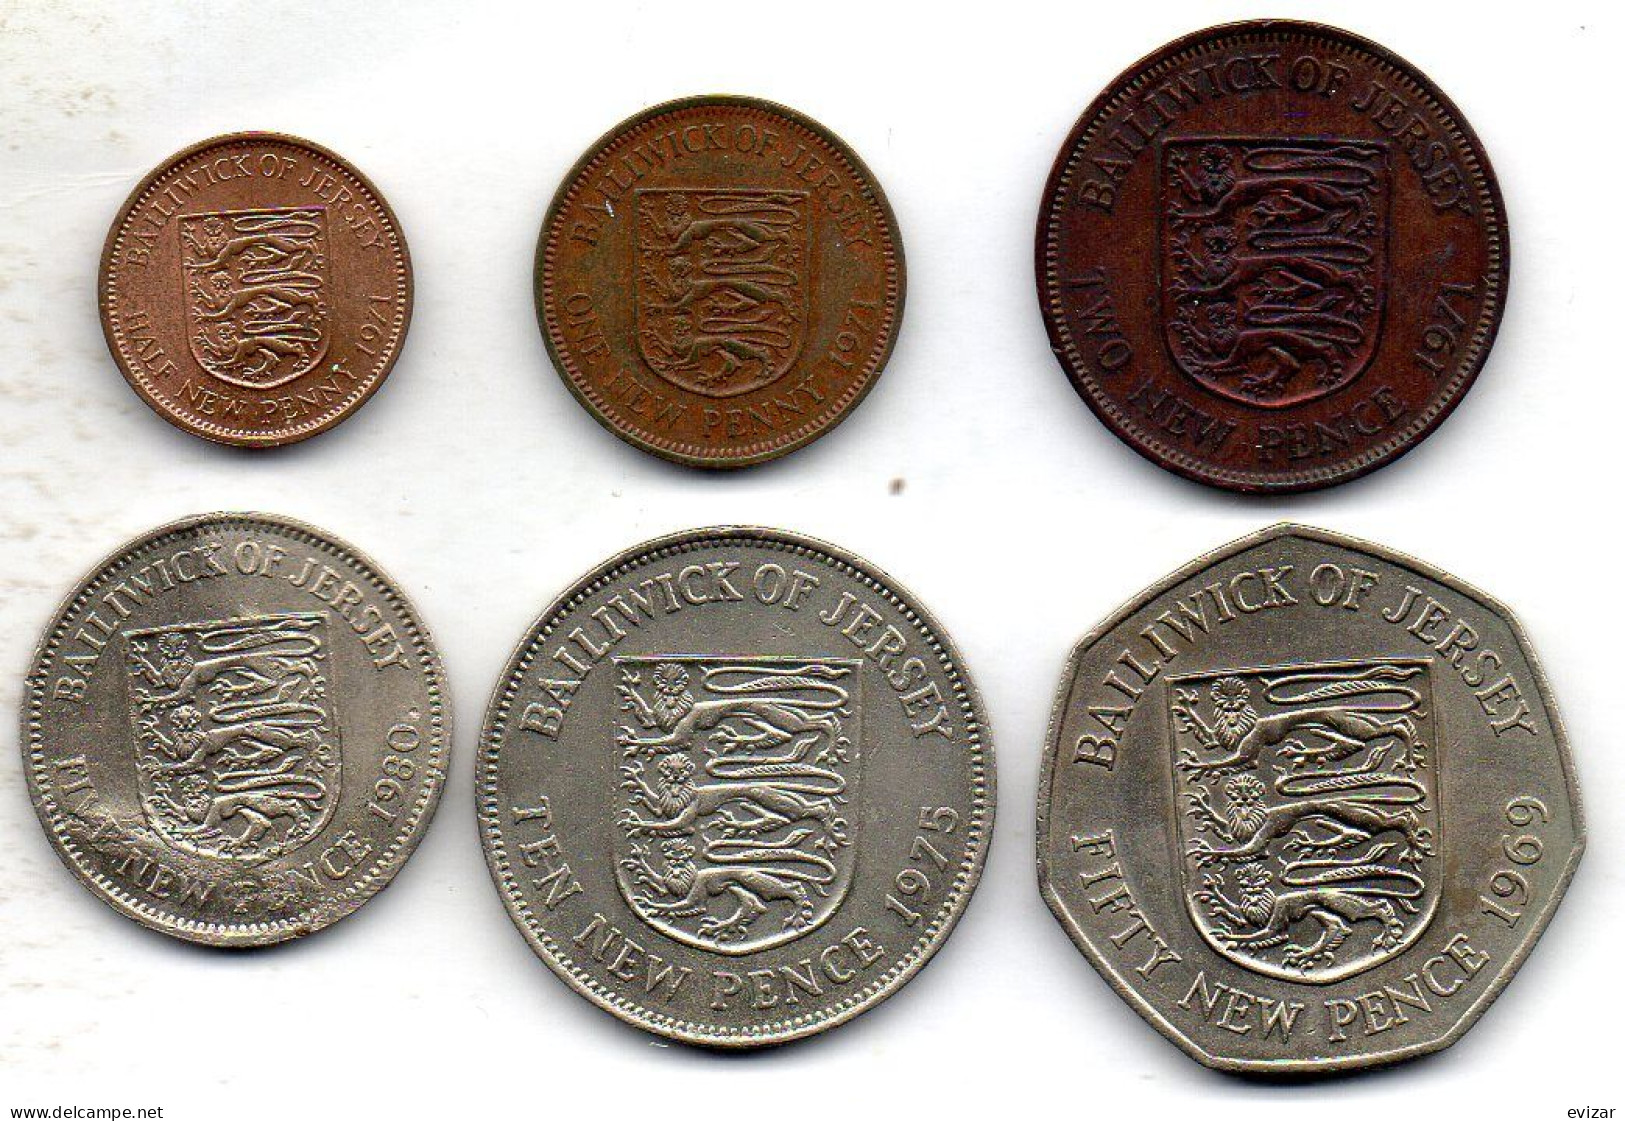 JERSEY, Set Of Six Coins 1/2, 1, 2, 5, 10, 50 New Pence, Bronze, Copper-Nickel, Year 1969-80, KM #29, 30, 31, 32, 33, 34 - Jersey